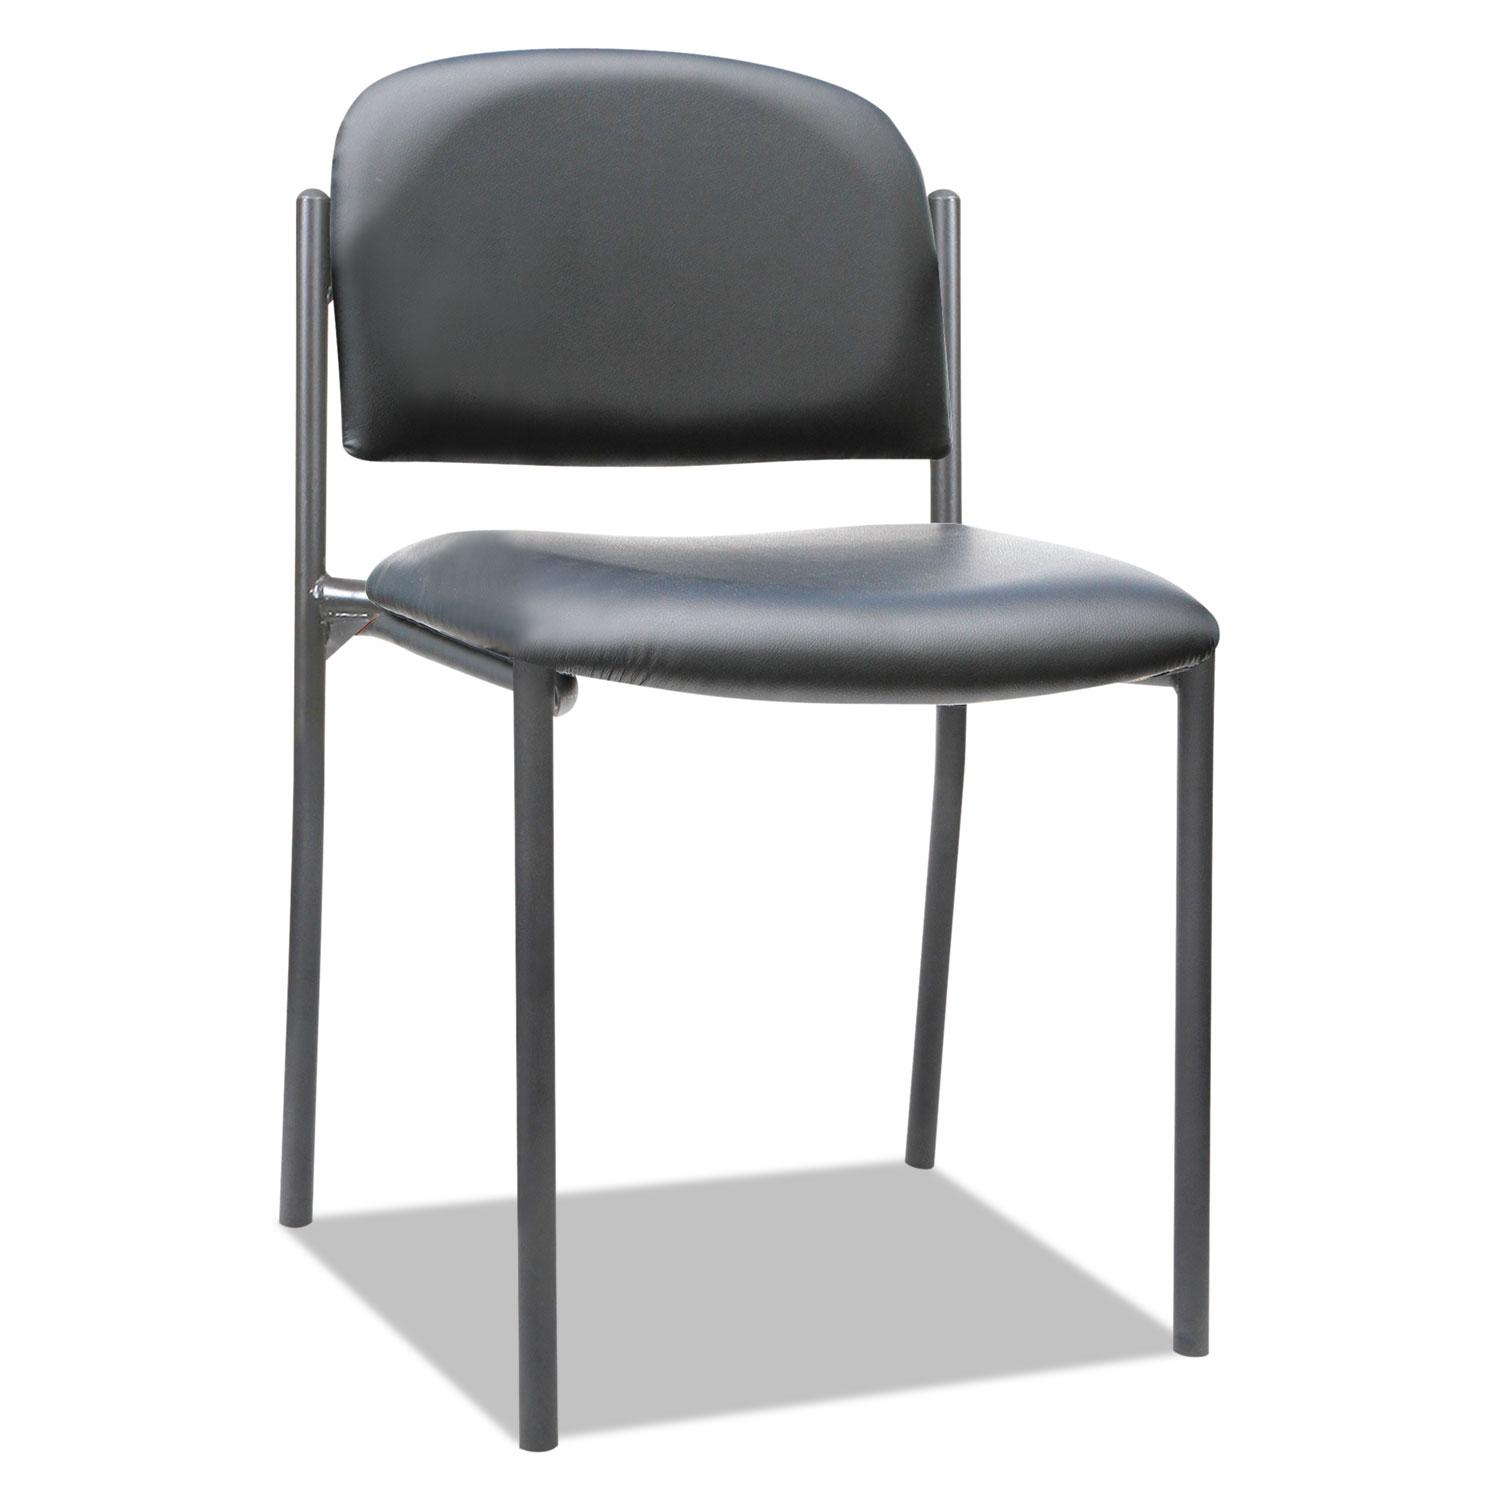 Sorrento Series Stacking Guest Chair, Black, Faux Leather, No Arms, 2 per carton